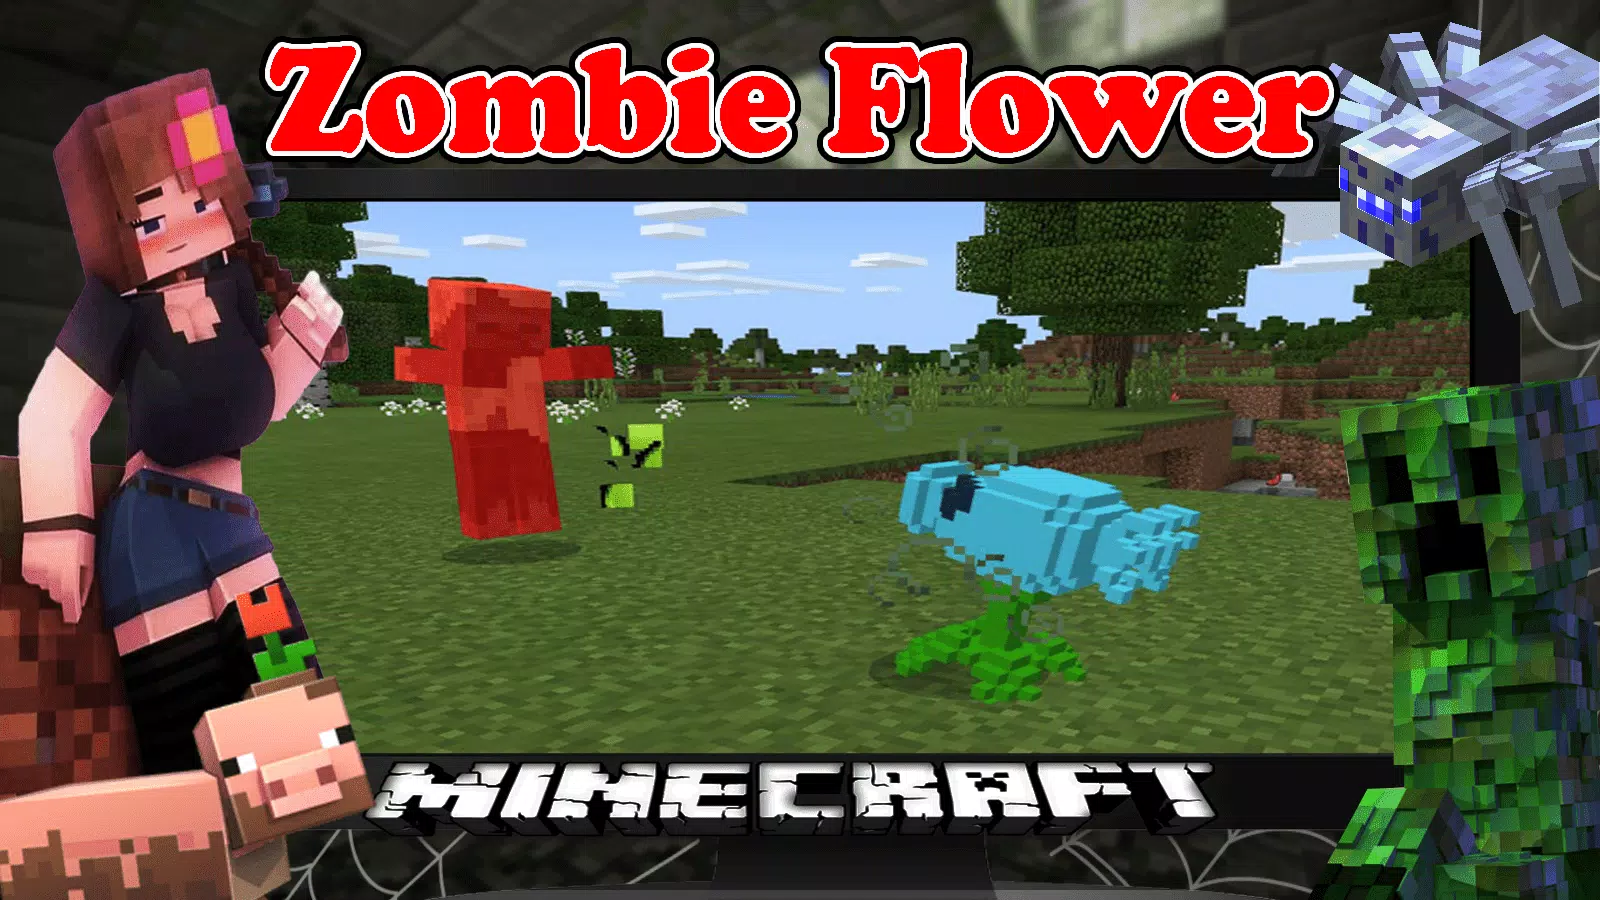 Plants Againts Zombie MOD for MCPE APK + Mod for Android.